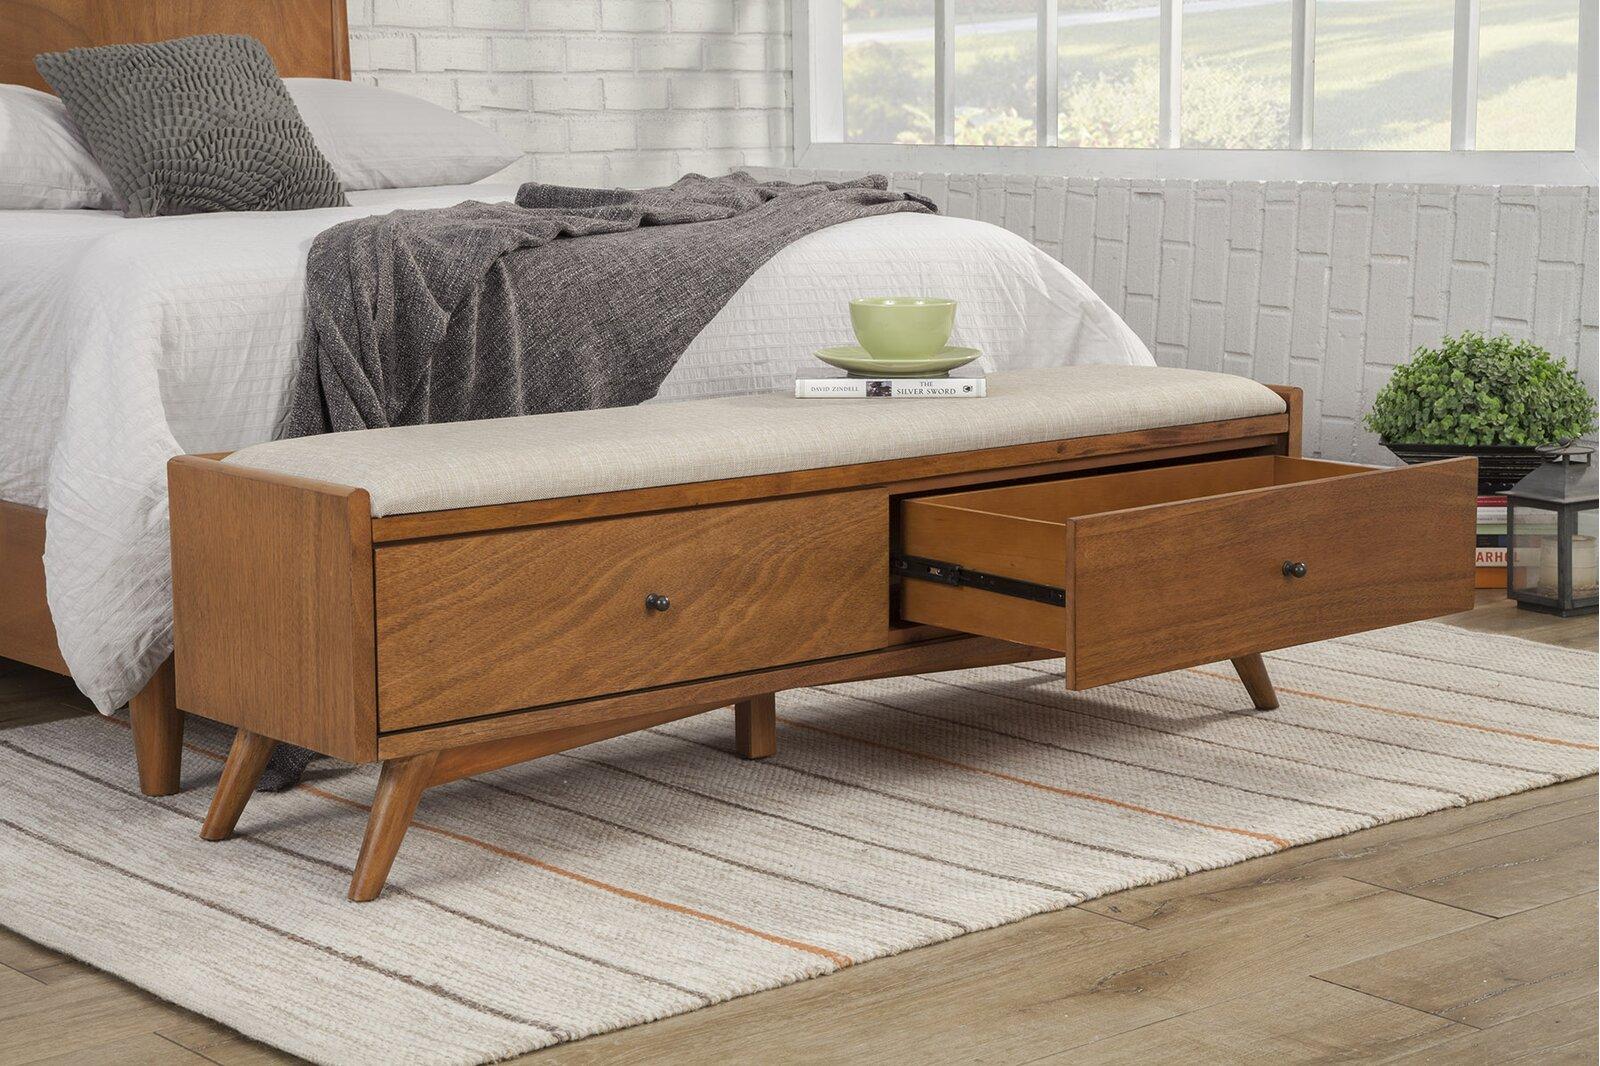 Designing Comfort: The Bedbench Elegance For Your Bedroom | Archiinterio